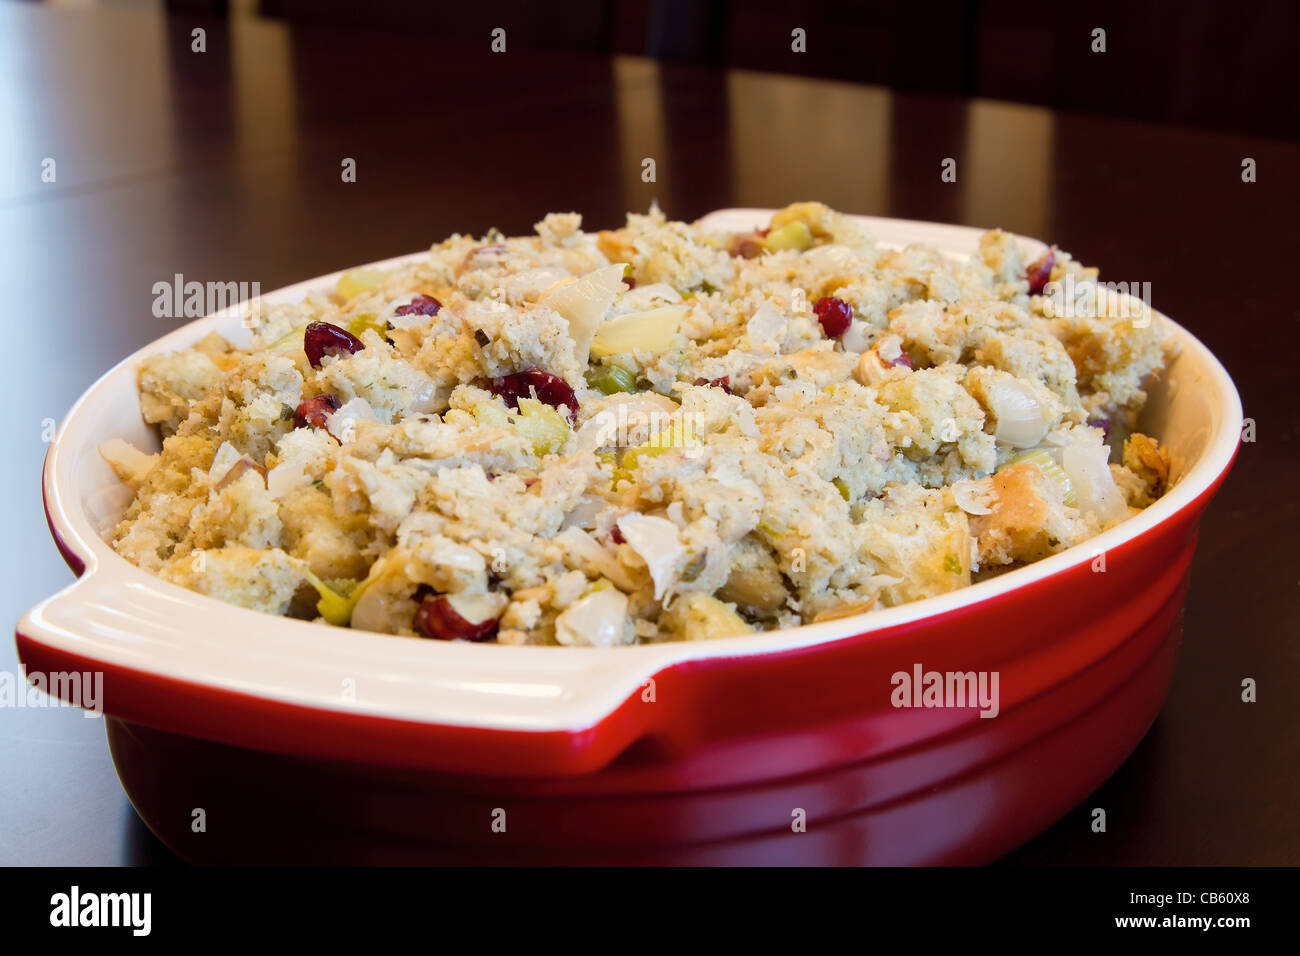 Thanksgiving Day Turkey Dinner Stuffing in a Bowl Closeup Stock Photo